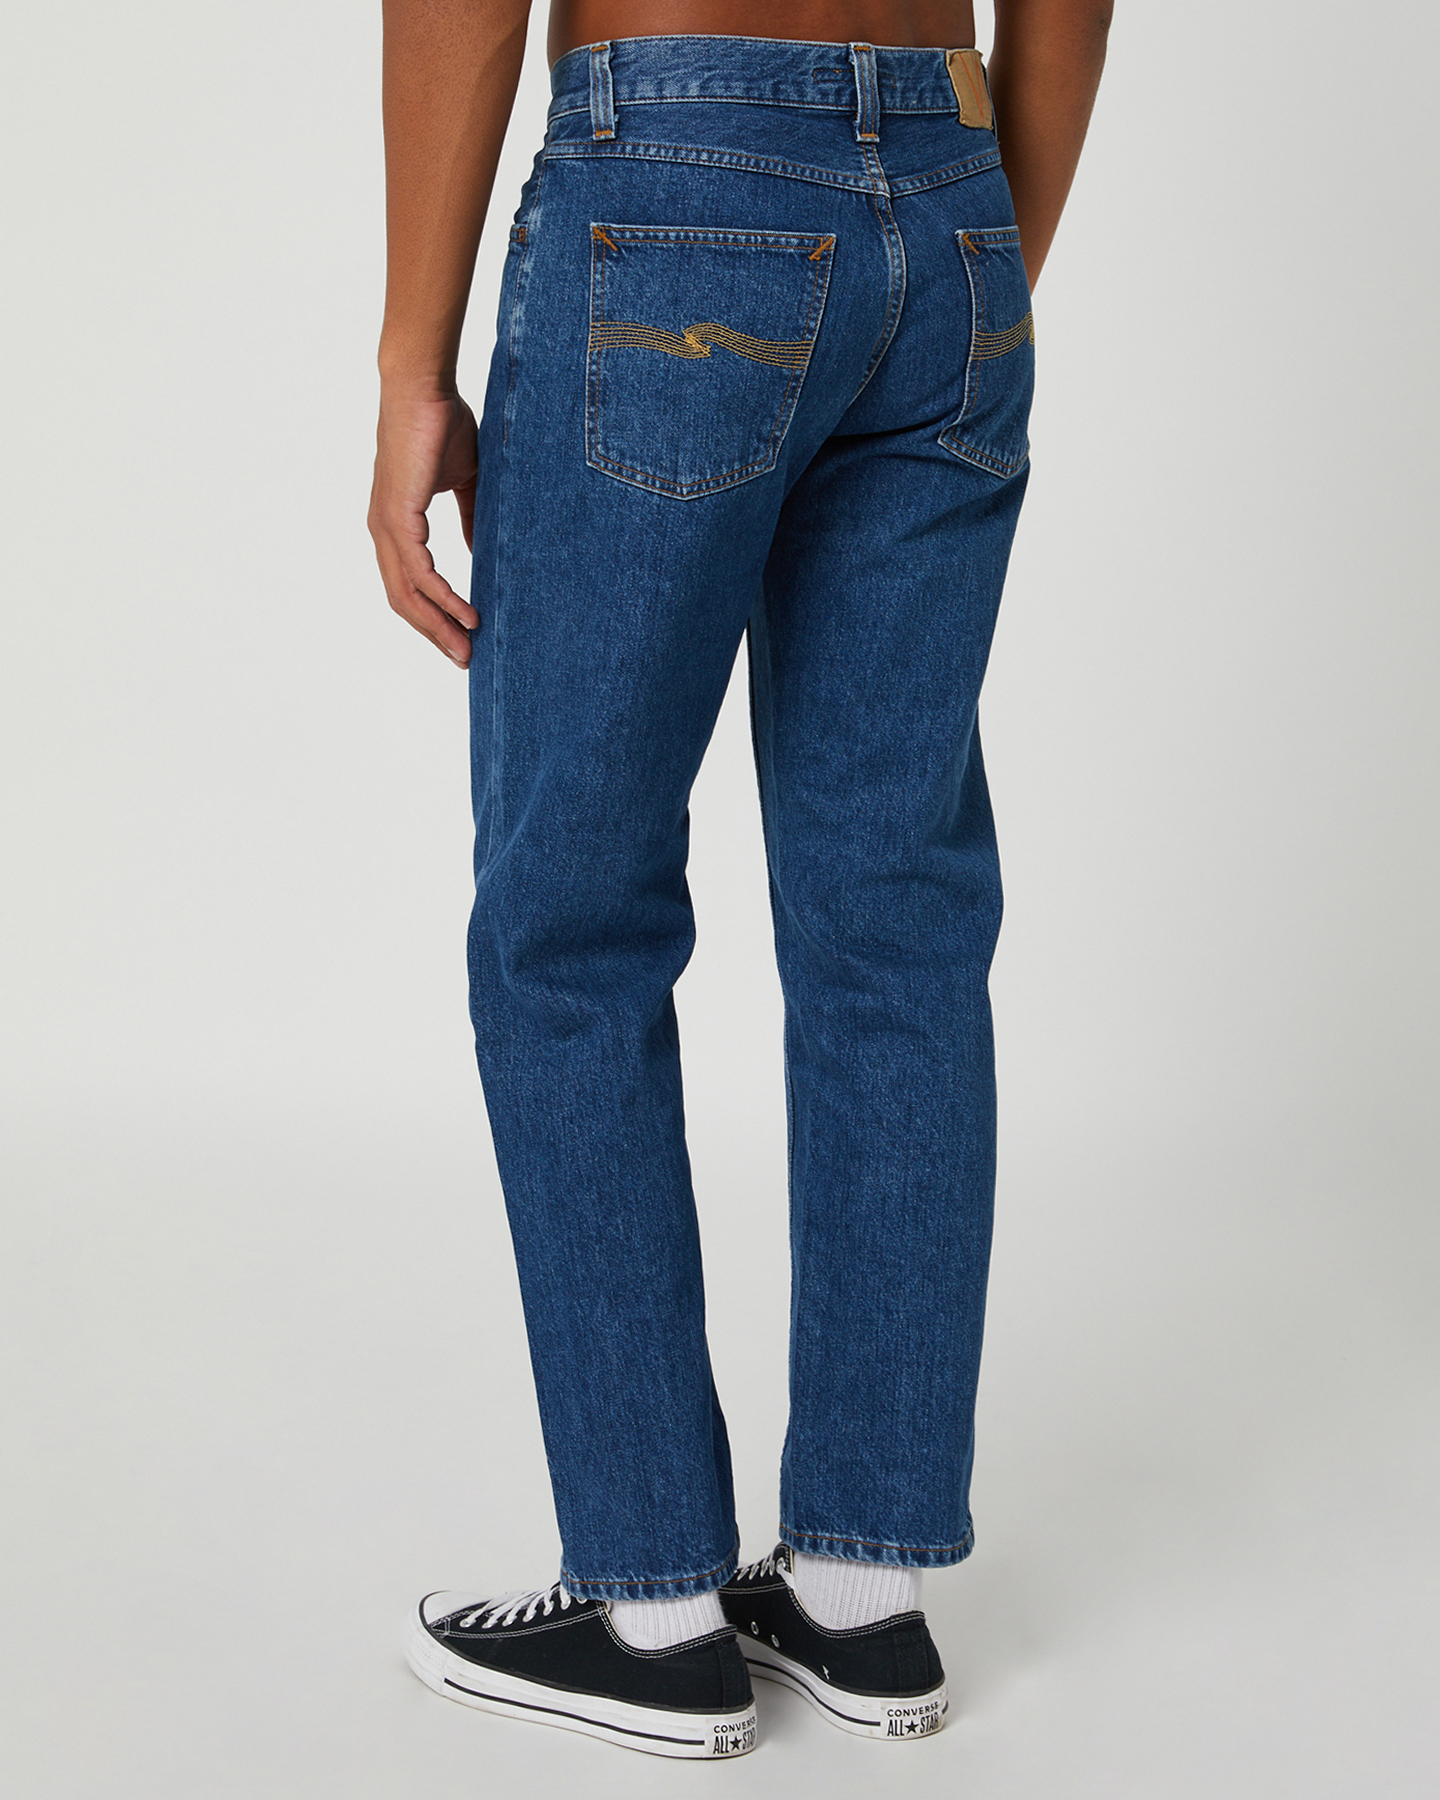 Nudie Jeans Co Rad Rufus Mens Jean - Monday Blues | SurfStitch